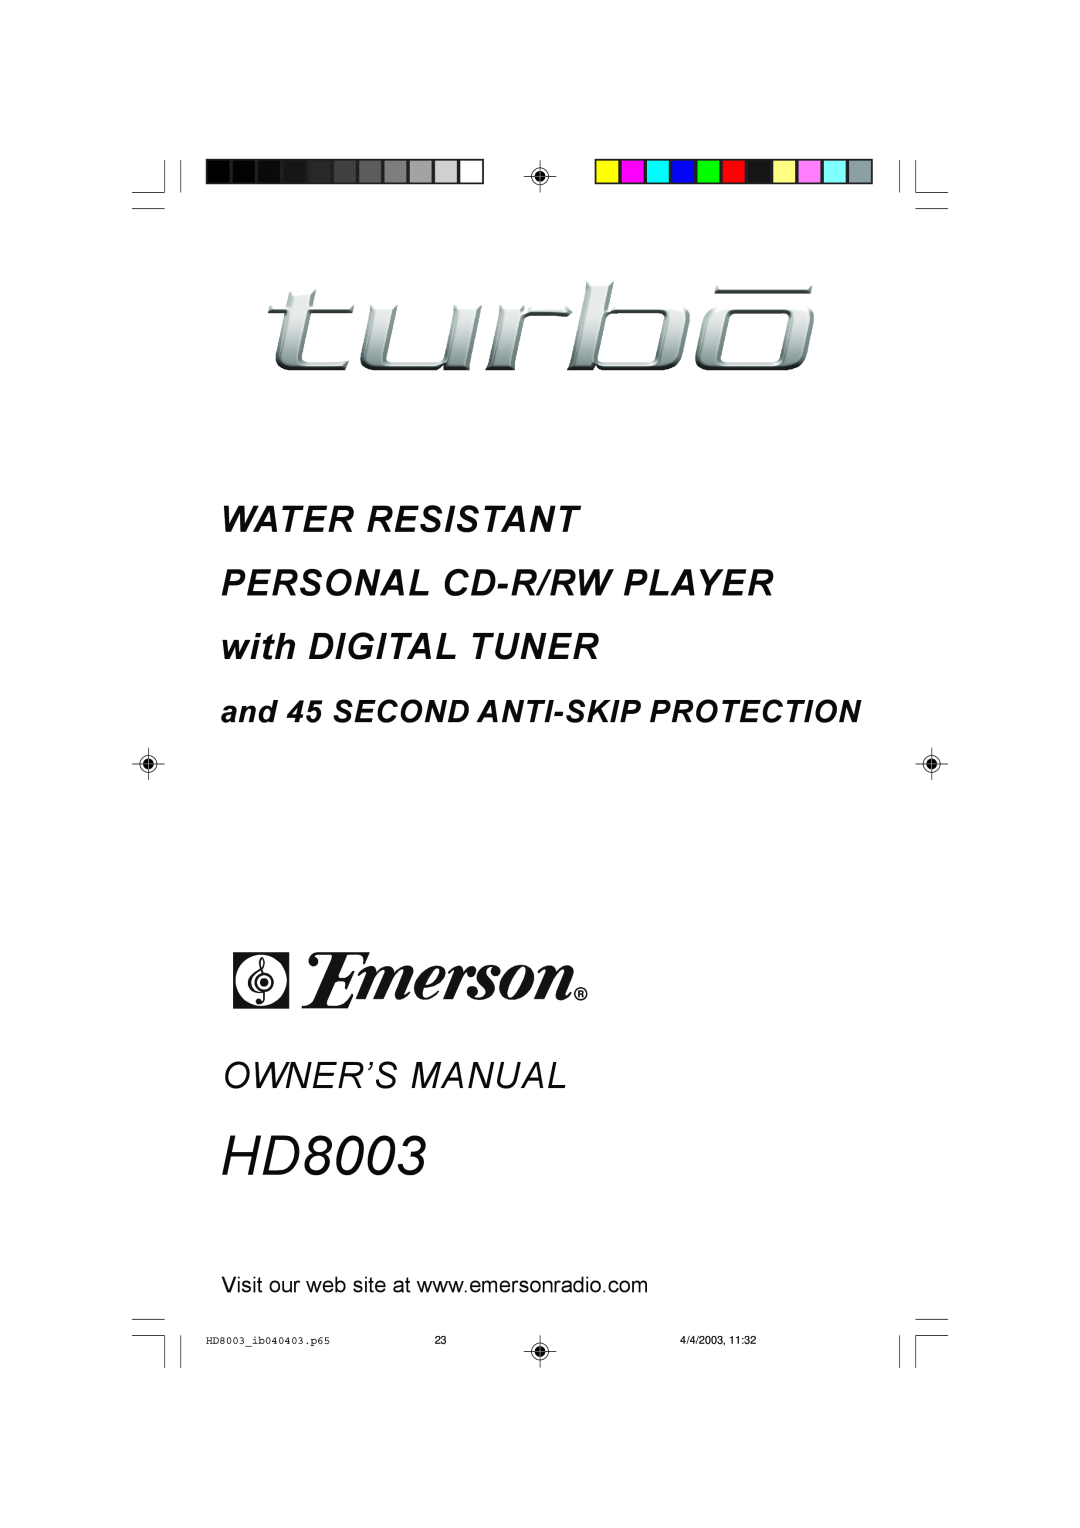 Emerson owner manual and 45 SECOND ANTI-SKIPPROTECTION, HD8003_ib040403.p65, 4/2003, 11:32 